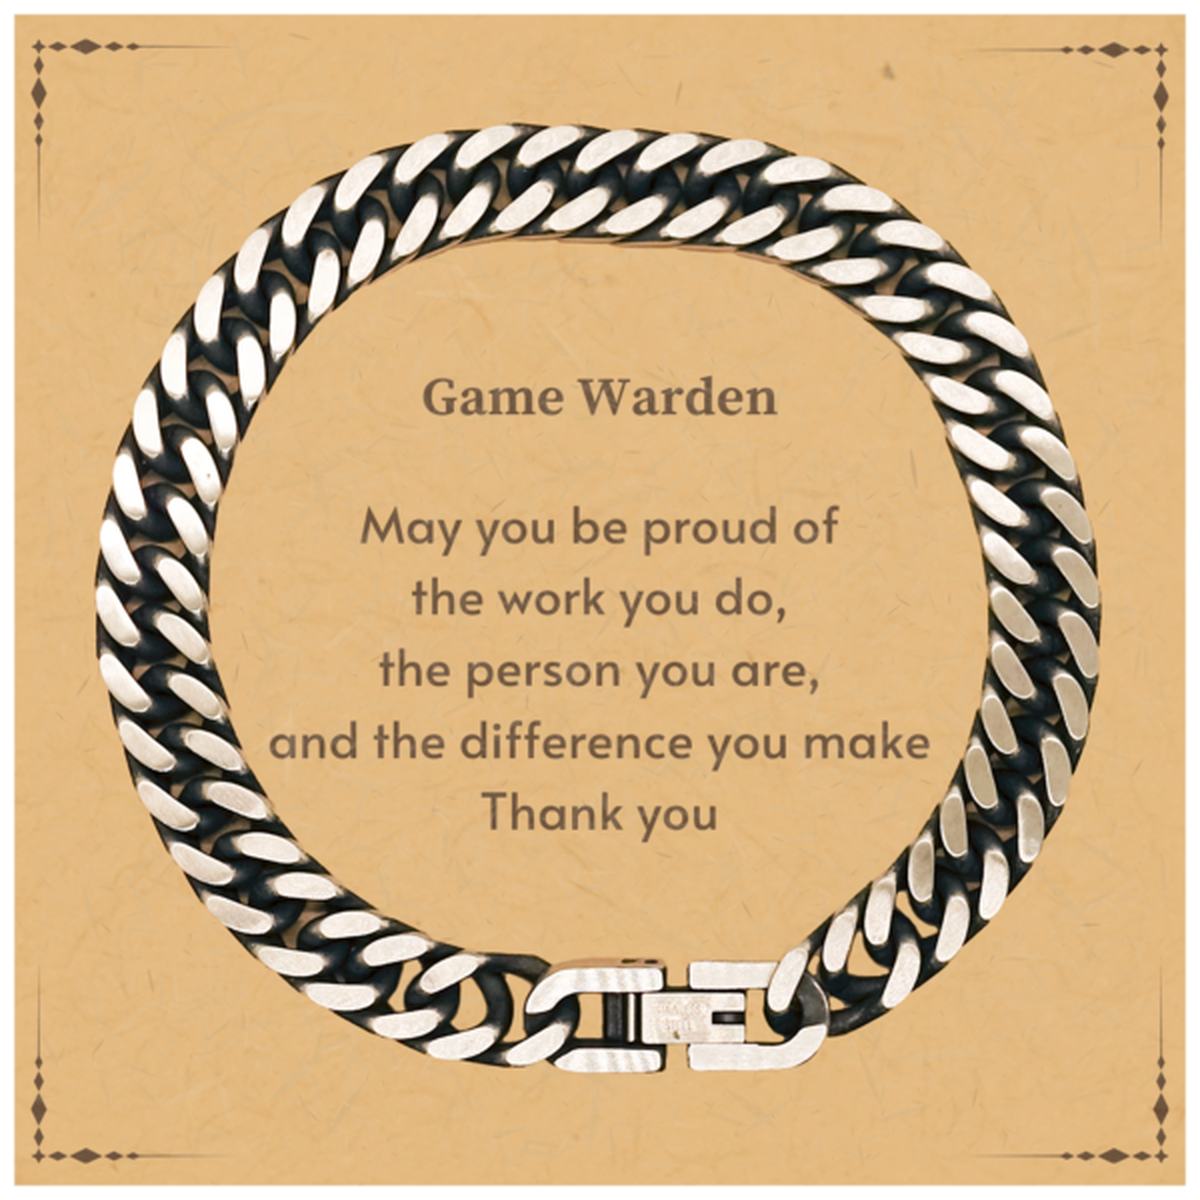 Heartwarming Cuban Link Chain Bracelet Retirement Coworkers Gifts for Game Warden, Game Warden May You be proud of the work you do, the person you are Gifts for Boss Men Women Friends